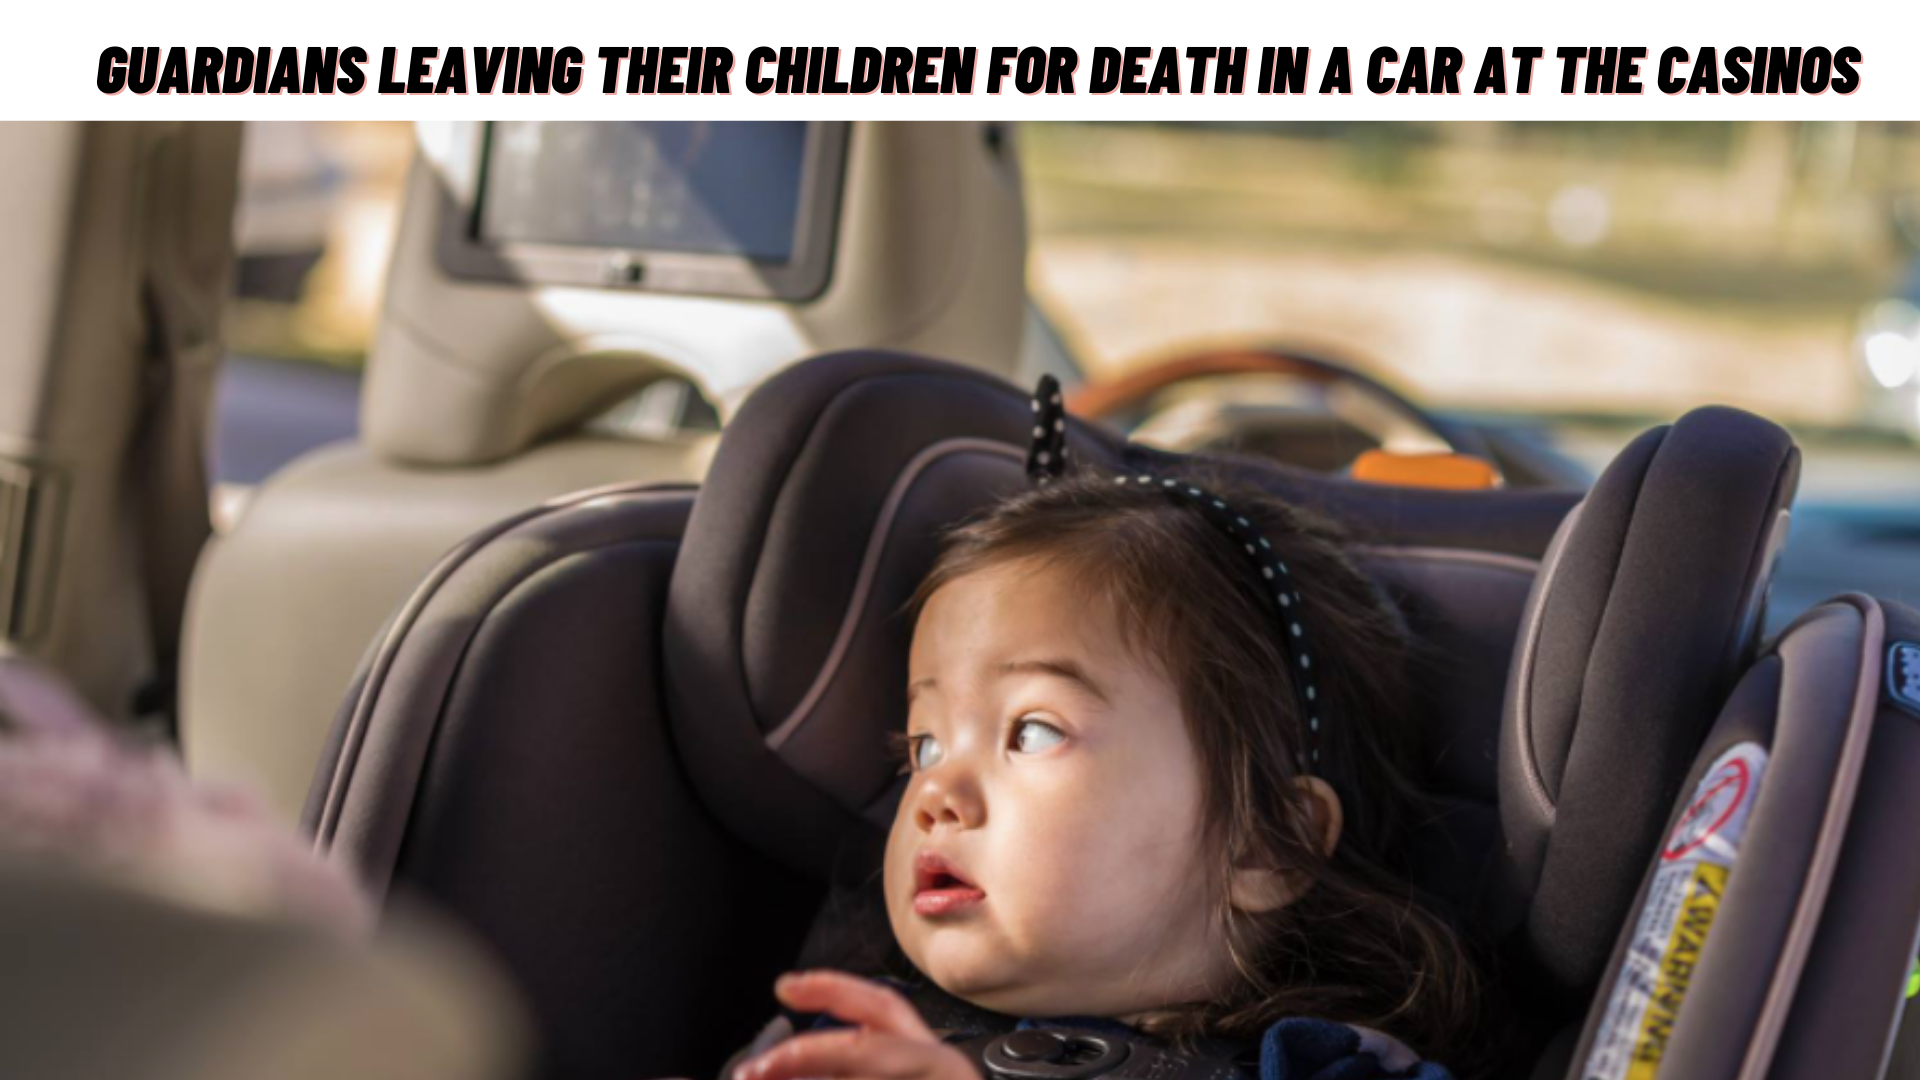 Guardians Leaving their Children for Death in Cars at the Casinos